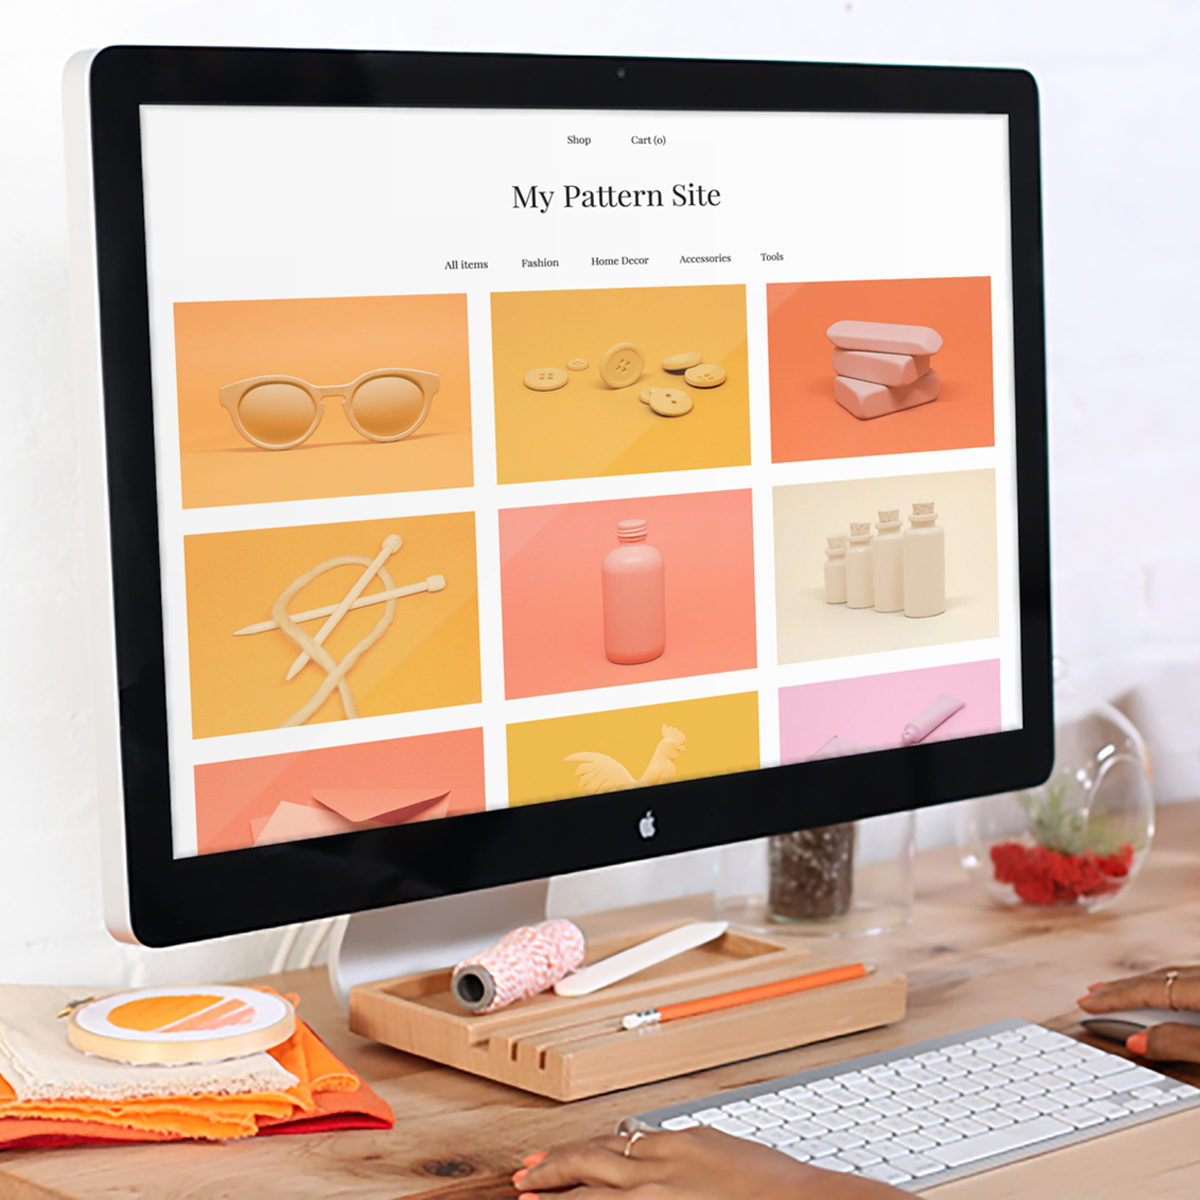 Etsy Launches Pattern A Website Builder For Its Sellers TechCrunch